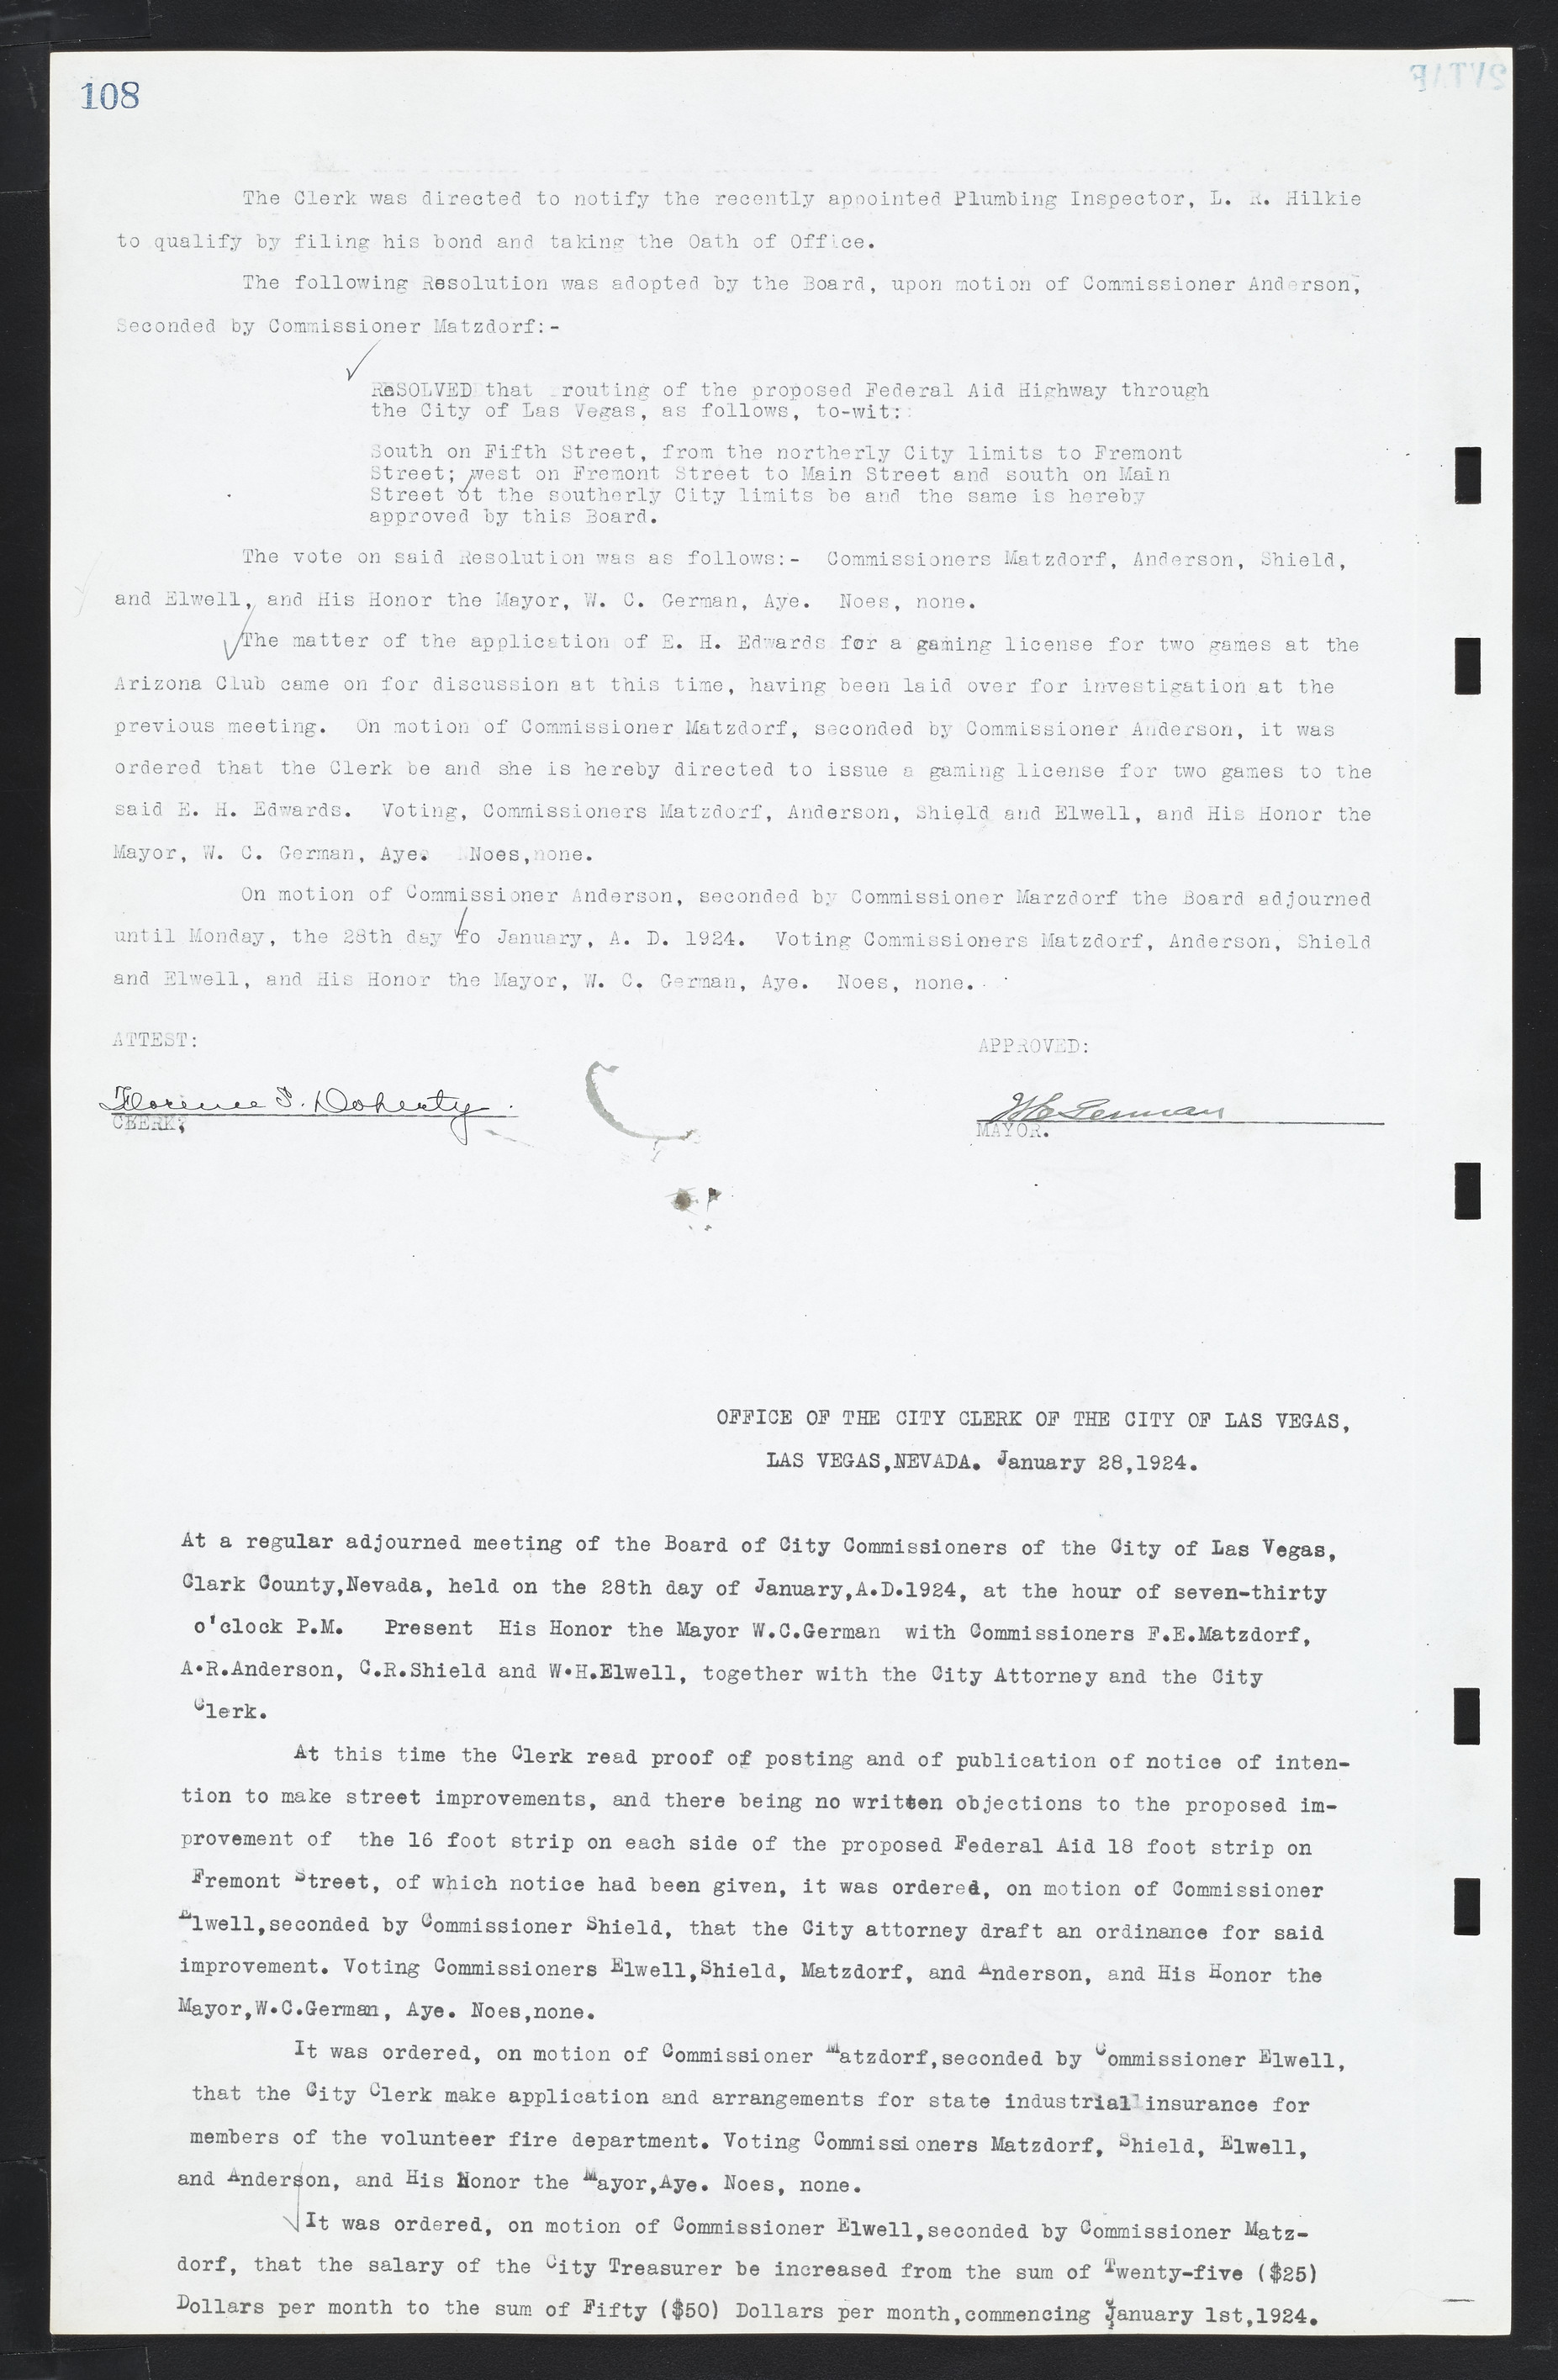 Las Vegas City Commission Minutes, March 1, 1922 to May 10, 1929, lvc000002-115